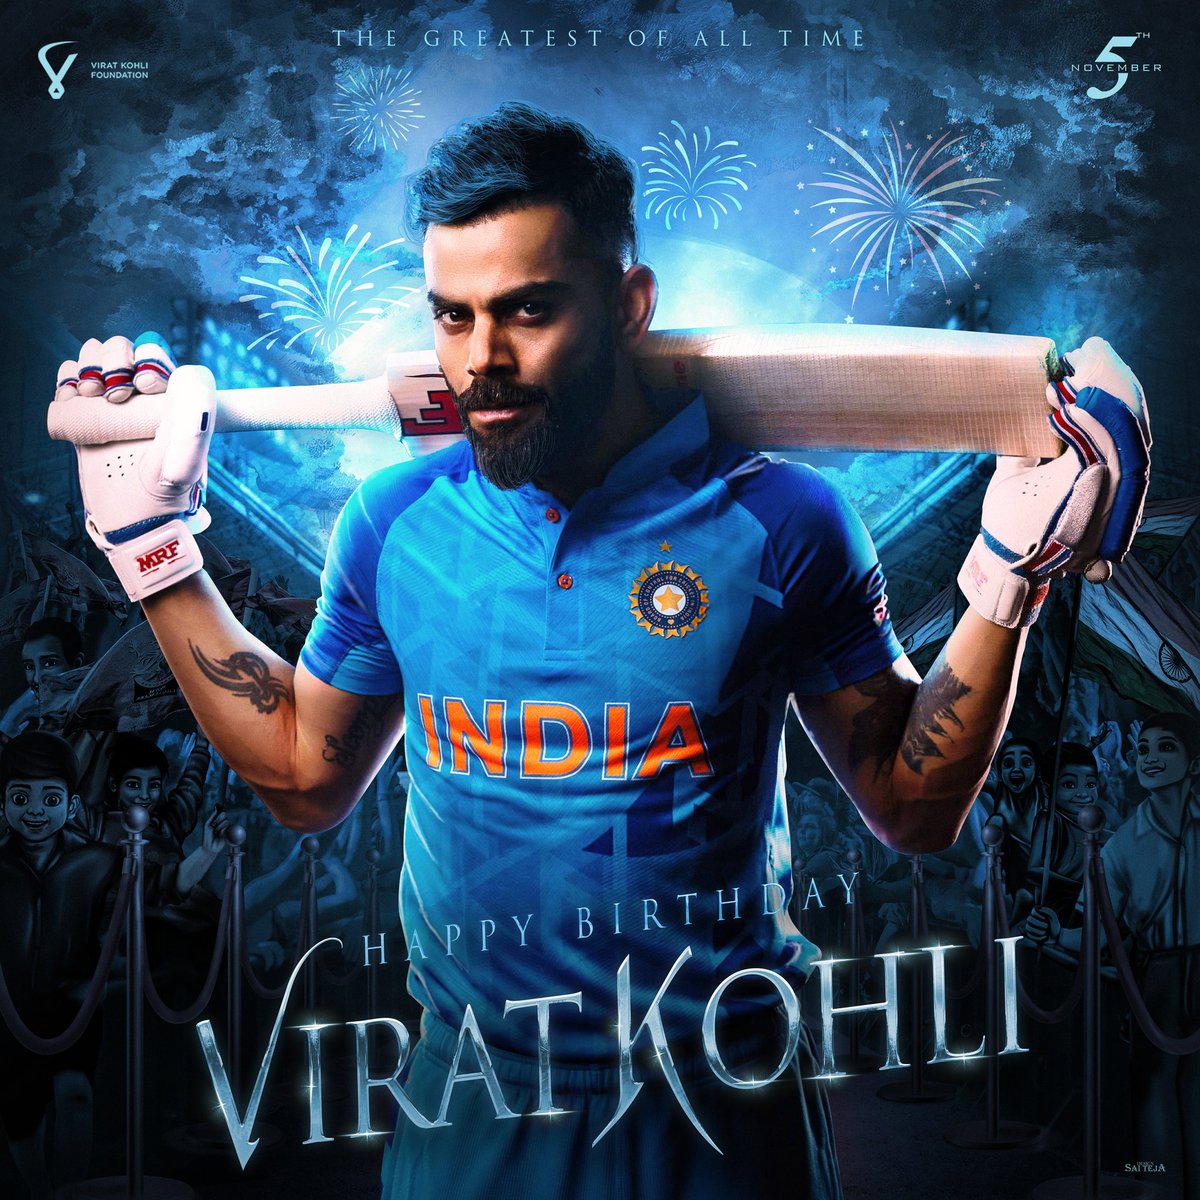 Here's The Common DP To Celebrate Our Idol Virat Kohli Birthday ❤️ Change Your DPs & Mention @imVkohli in All Your Tweets 🔥 #KingKohliBirthdayCDP